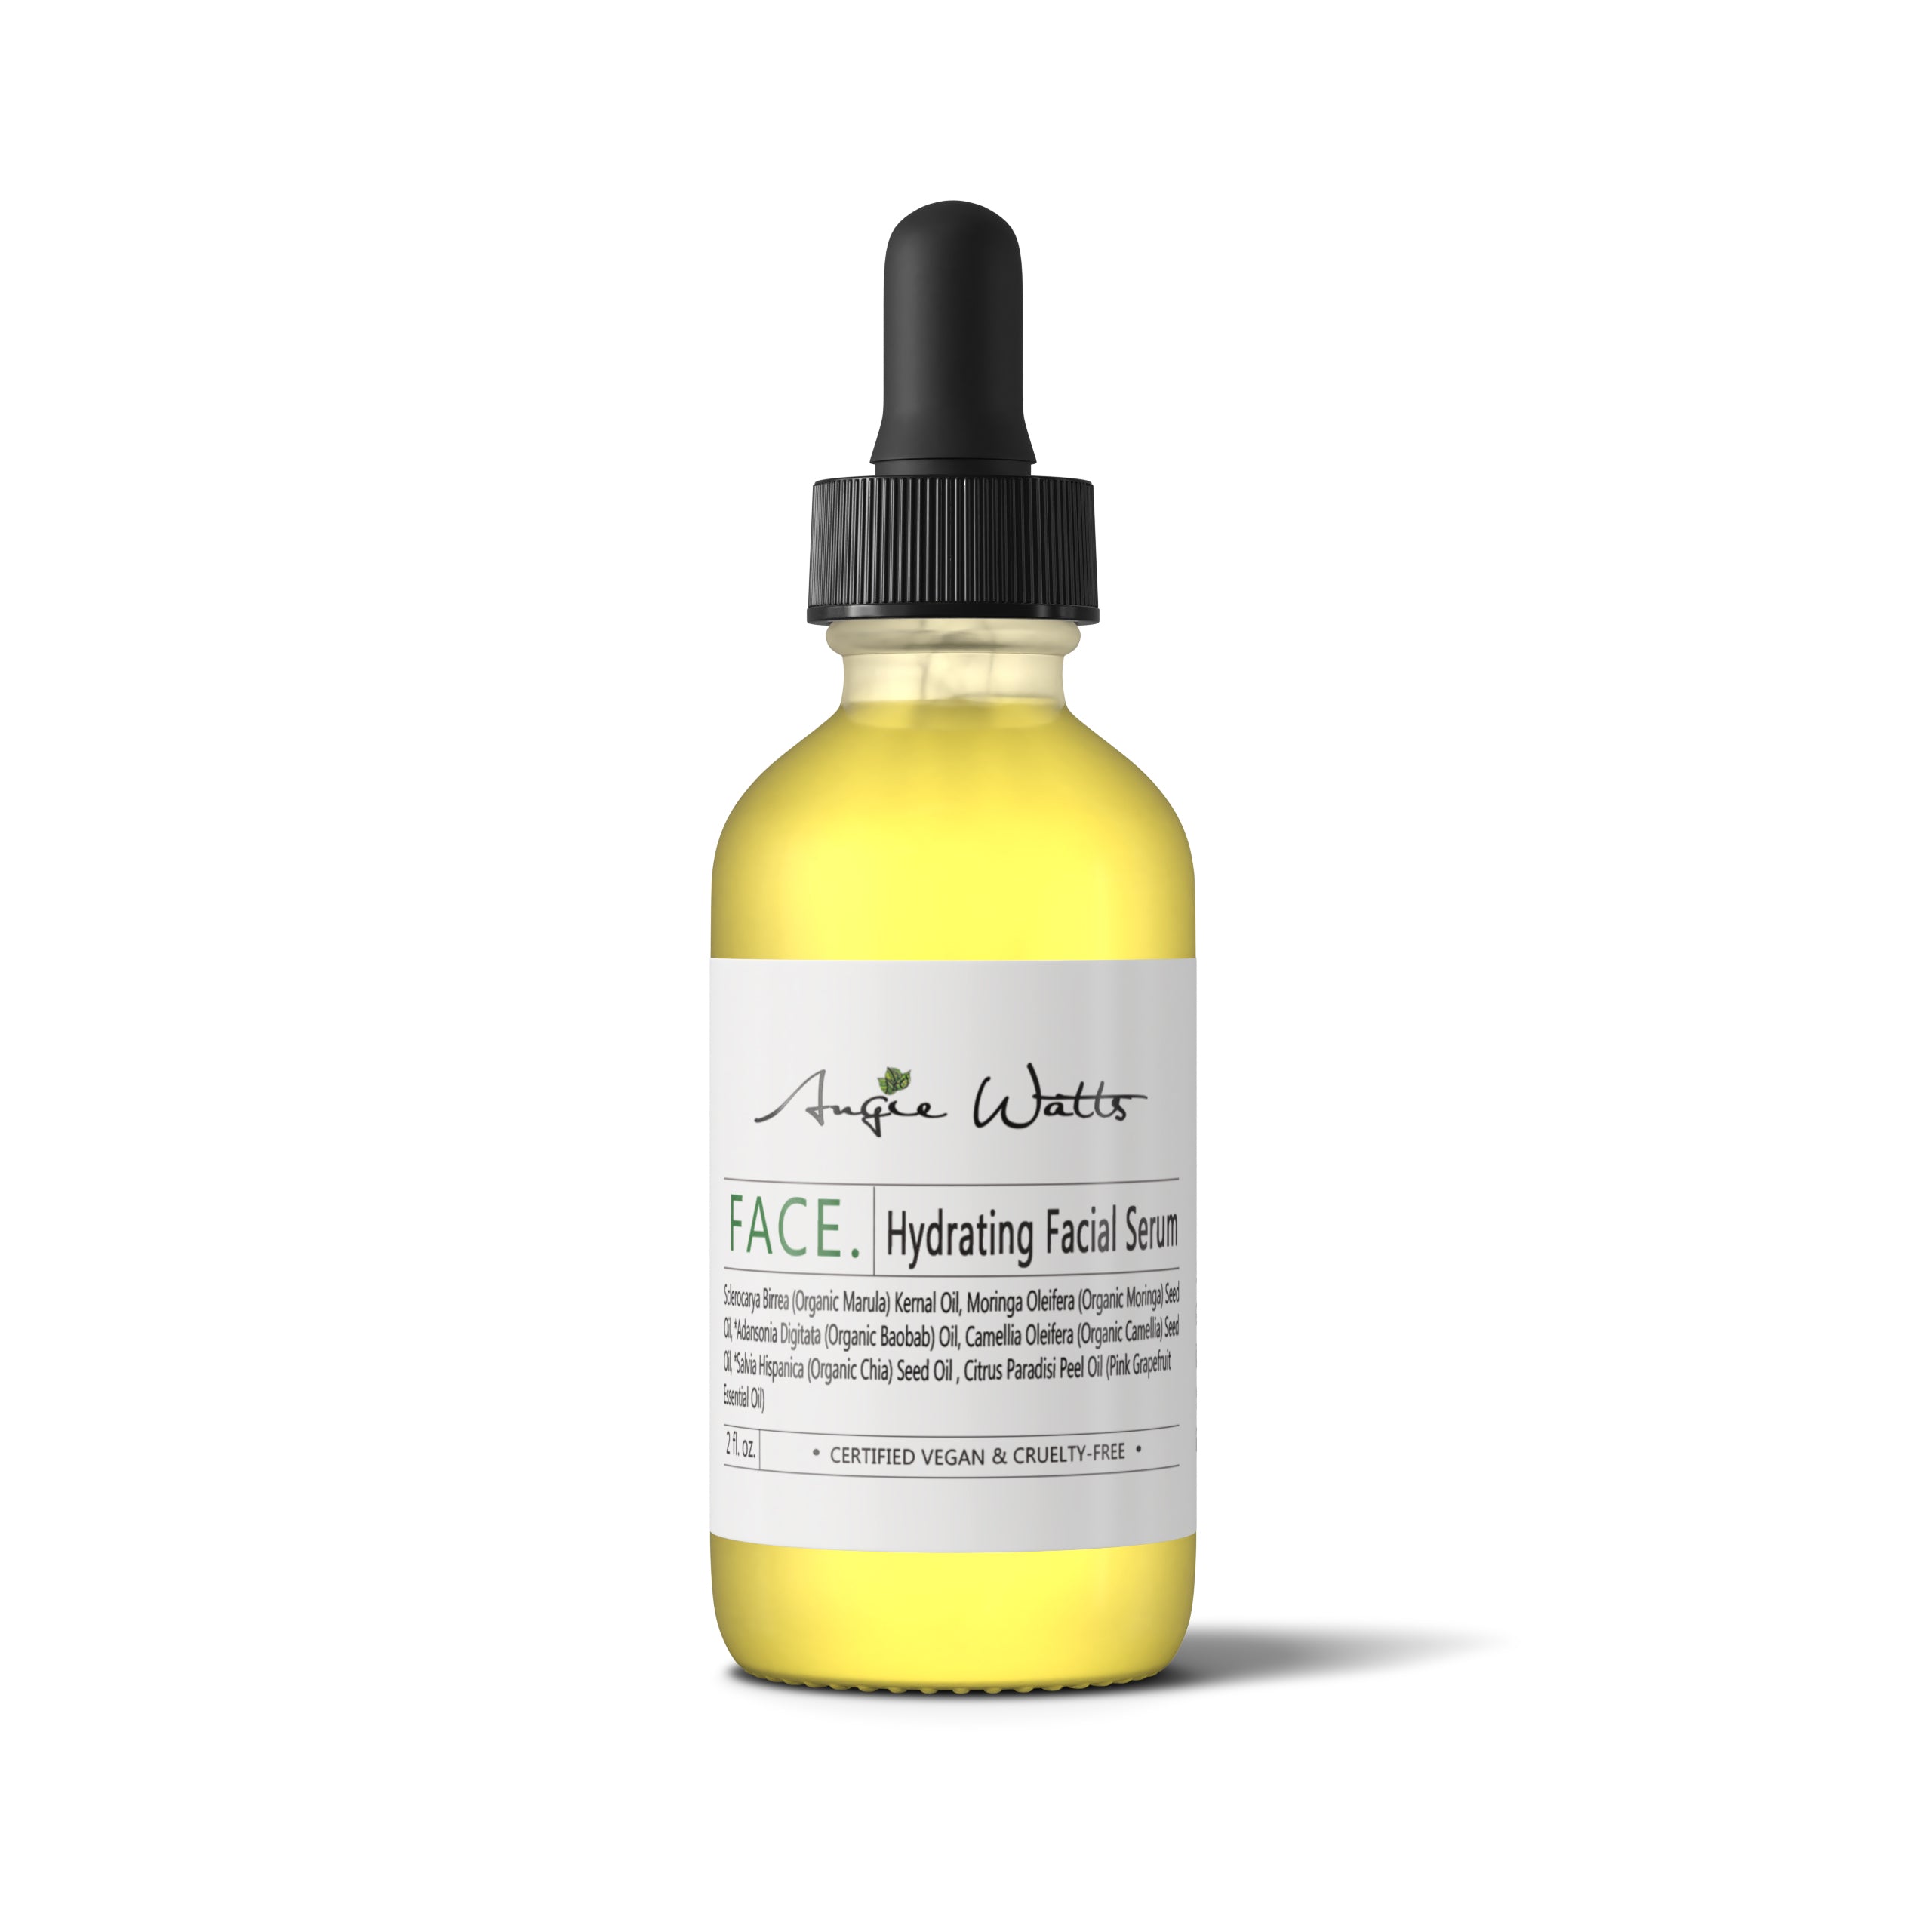 Angie Watts FACE Hydrating Facial Serum, clear bottle with dropper